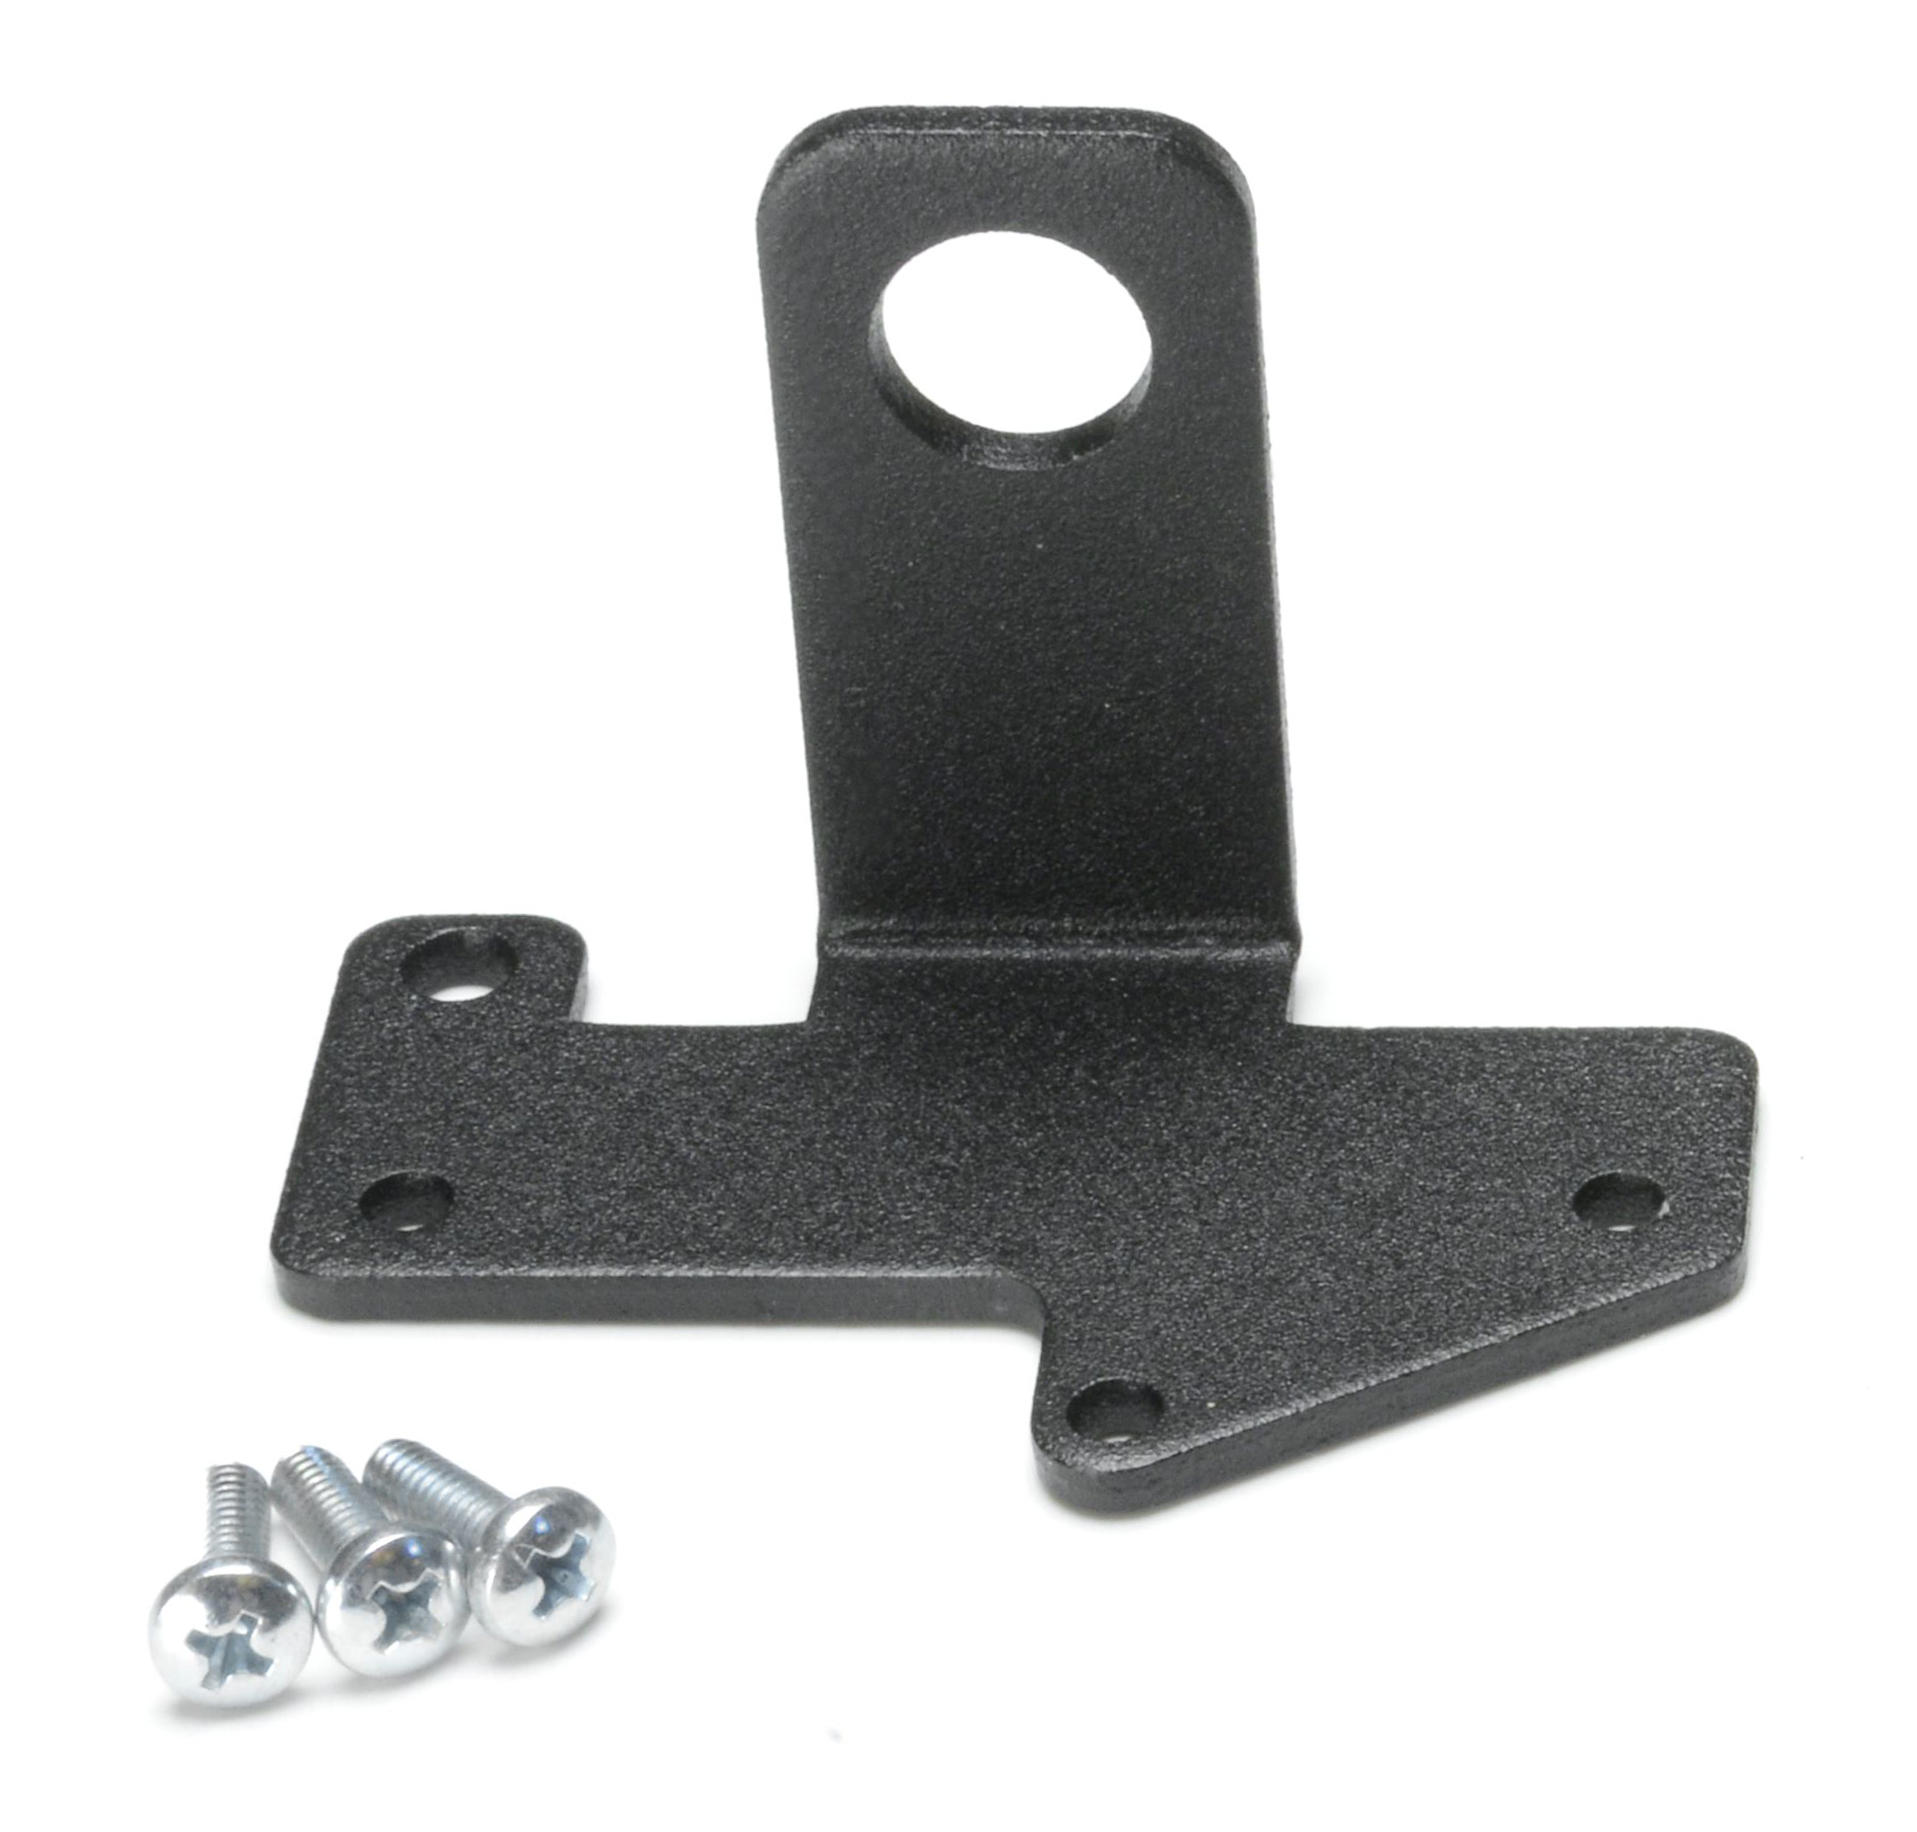 5602 - Multiverse SHoW Baby Mounting Plate with hardware